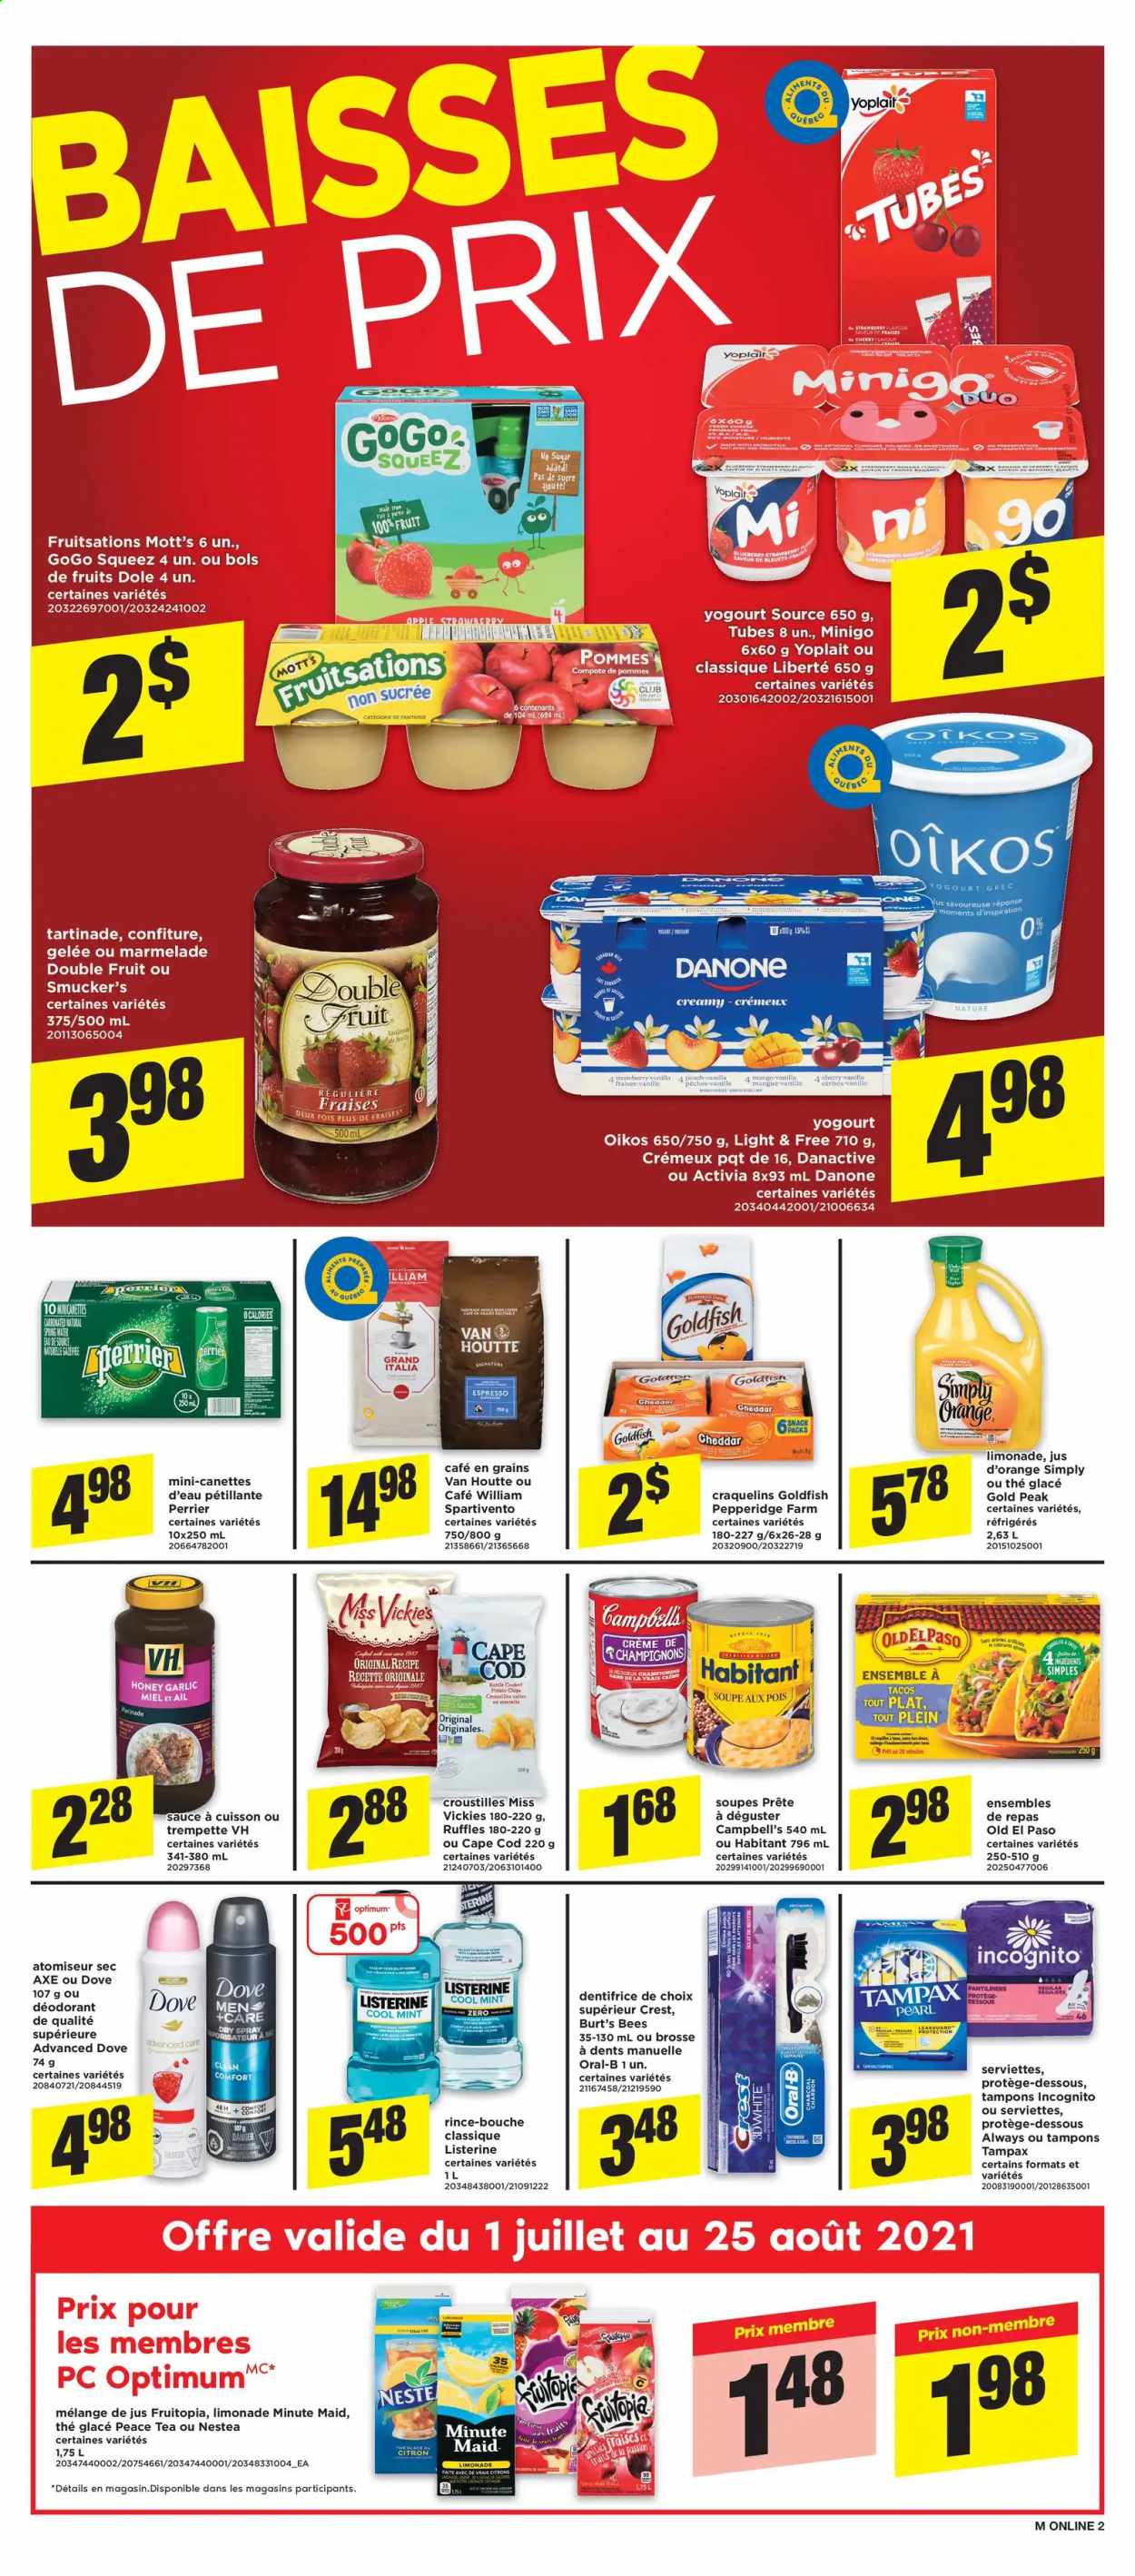 thumbnail - Maxi & Cie Flyer - July 15, 2021 - July 21, 2021 - Sales products - Old El Paso, tacos, garlic, Dole, mango, cherries, Mott's, cod, Campbell's, cheese, Activia, Oikos, Yoplait, snack, Goldfish, Ruffles, compote, marinade, honey, Perrier, fruit punch, tea, Crest, pantiliners, tampons, anti-perspirant, Sure, Danone, Listerine, Tampax, Oral-B, deodorant. Page 8.